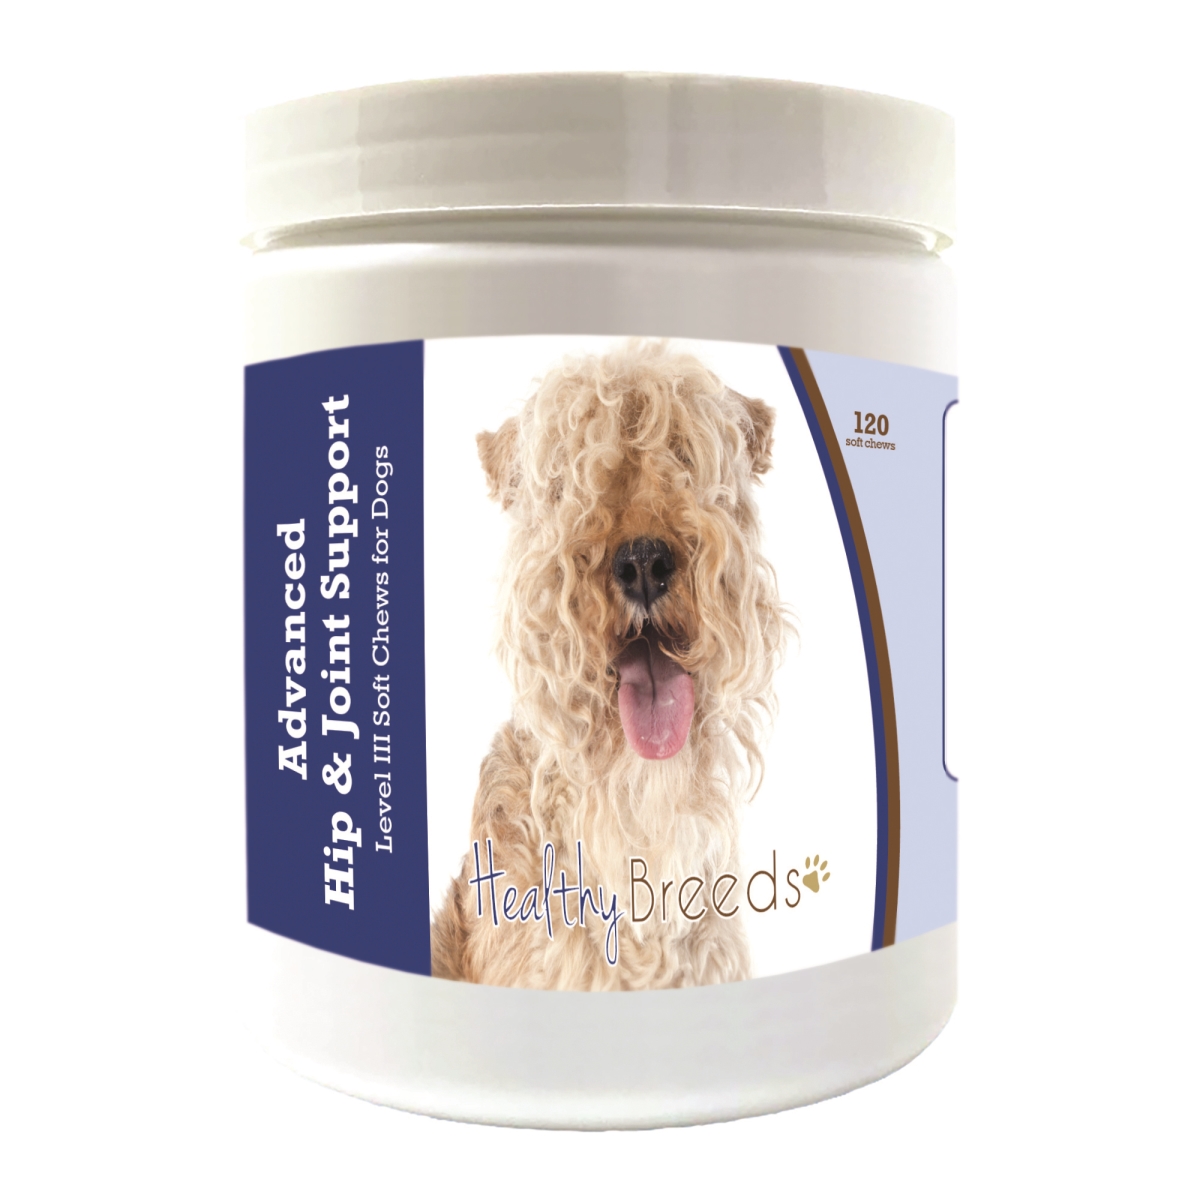 Picture of Healthy Breeds 192959898583 Lakeland Terrier Advanced Hip & Joint Support Level III Soft Chews for Dogs